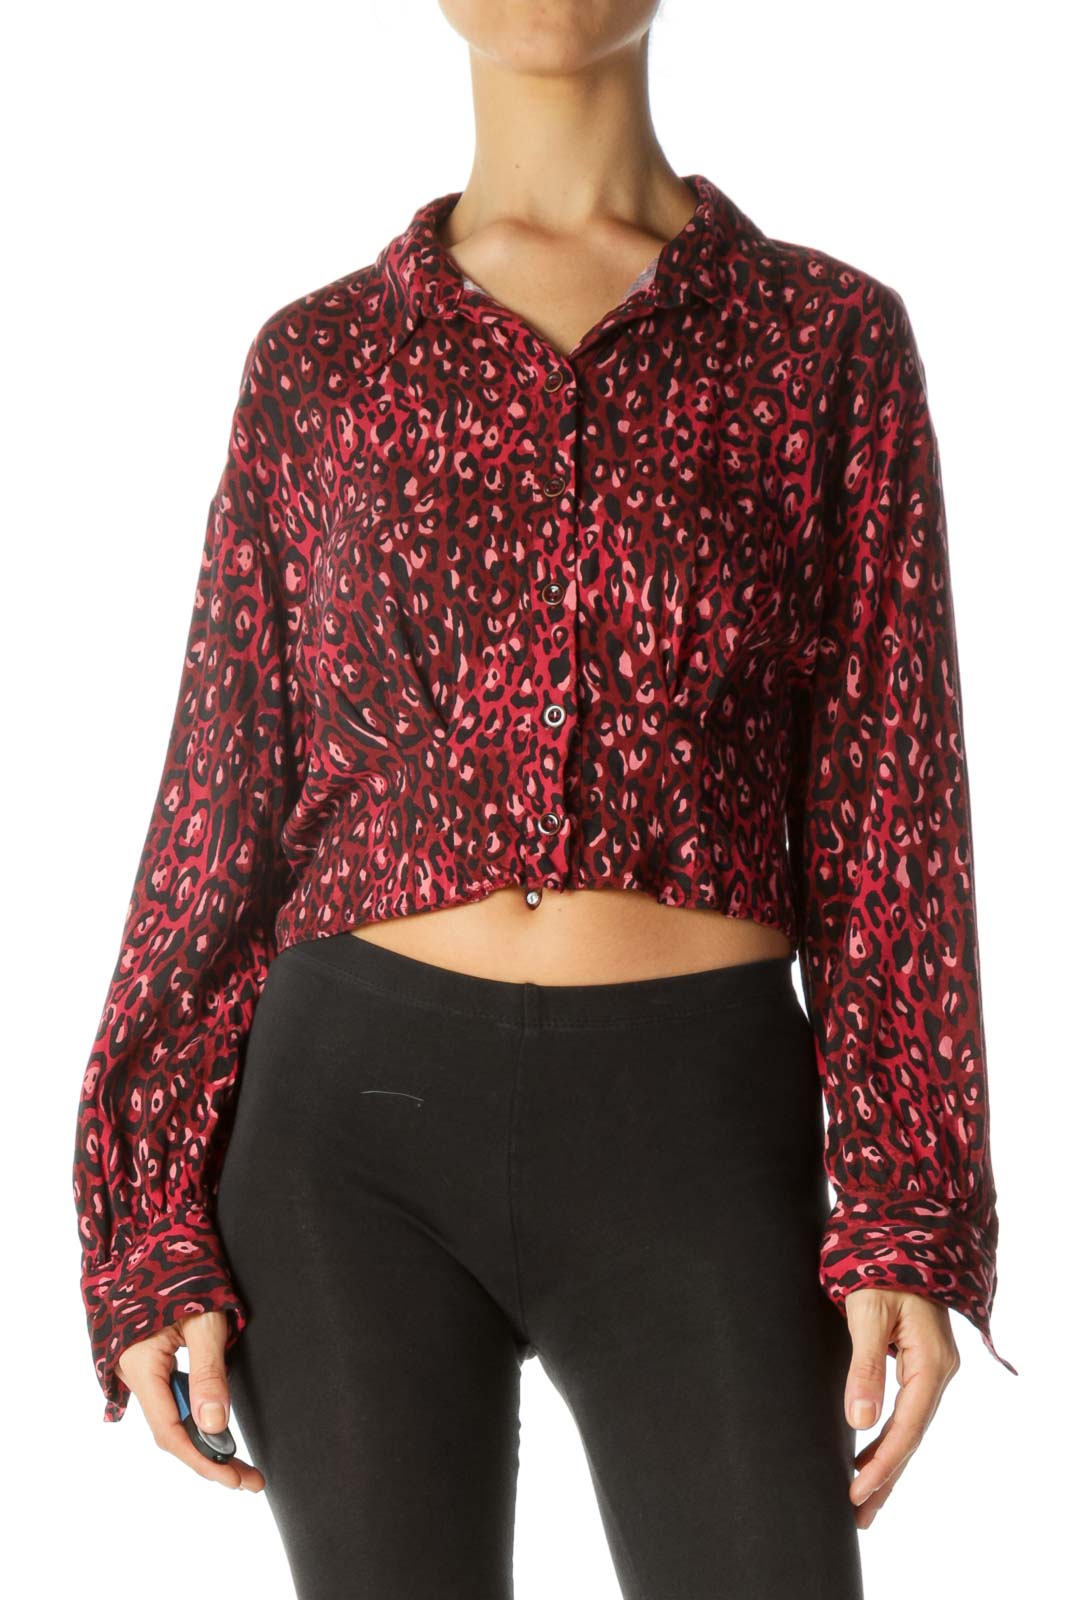 Burgundy Black Animal Print Long Sleeve Buttoned Top Front